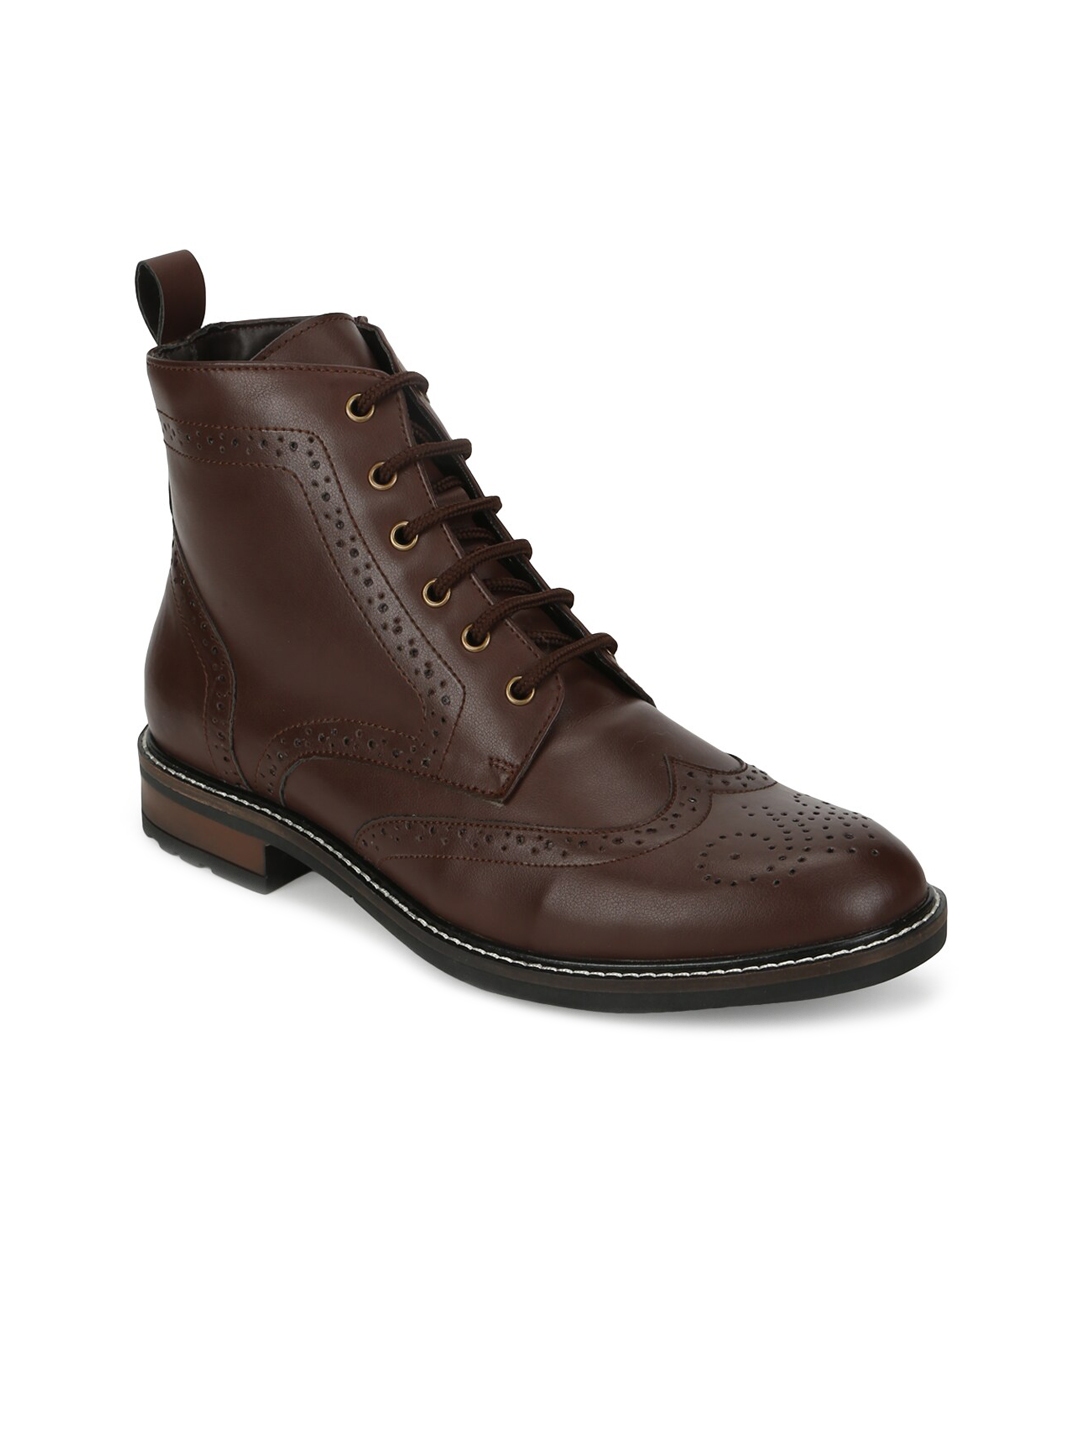 Buy Truffle Collection Men Brown Perforations High Top Flat Boots ...